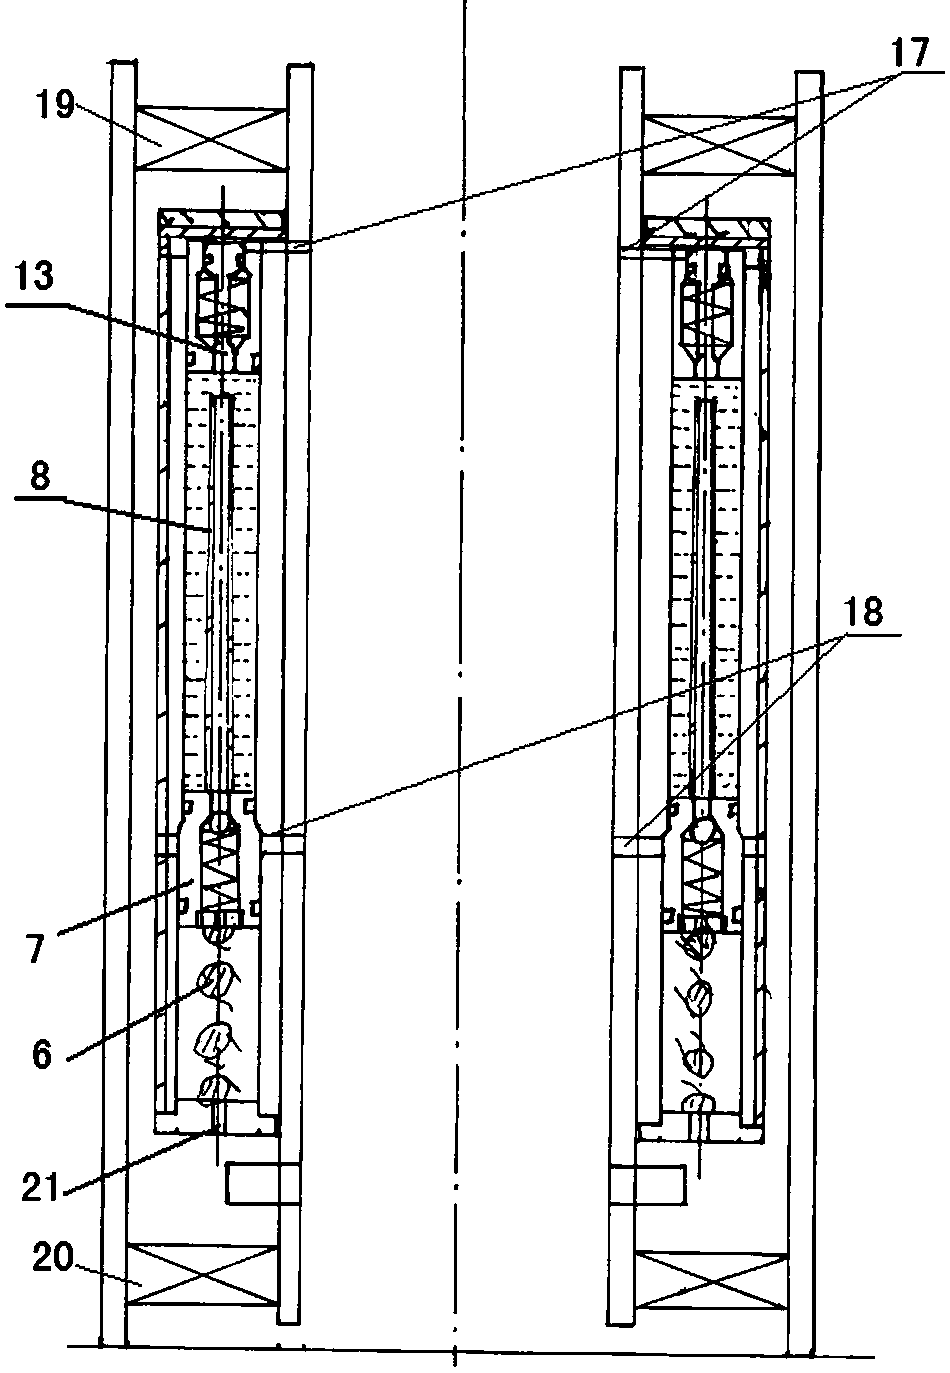 Water injection well bisalt anti-scaling descaling device